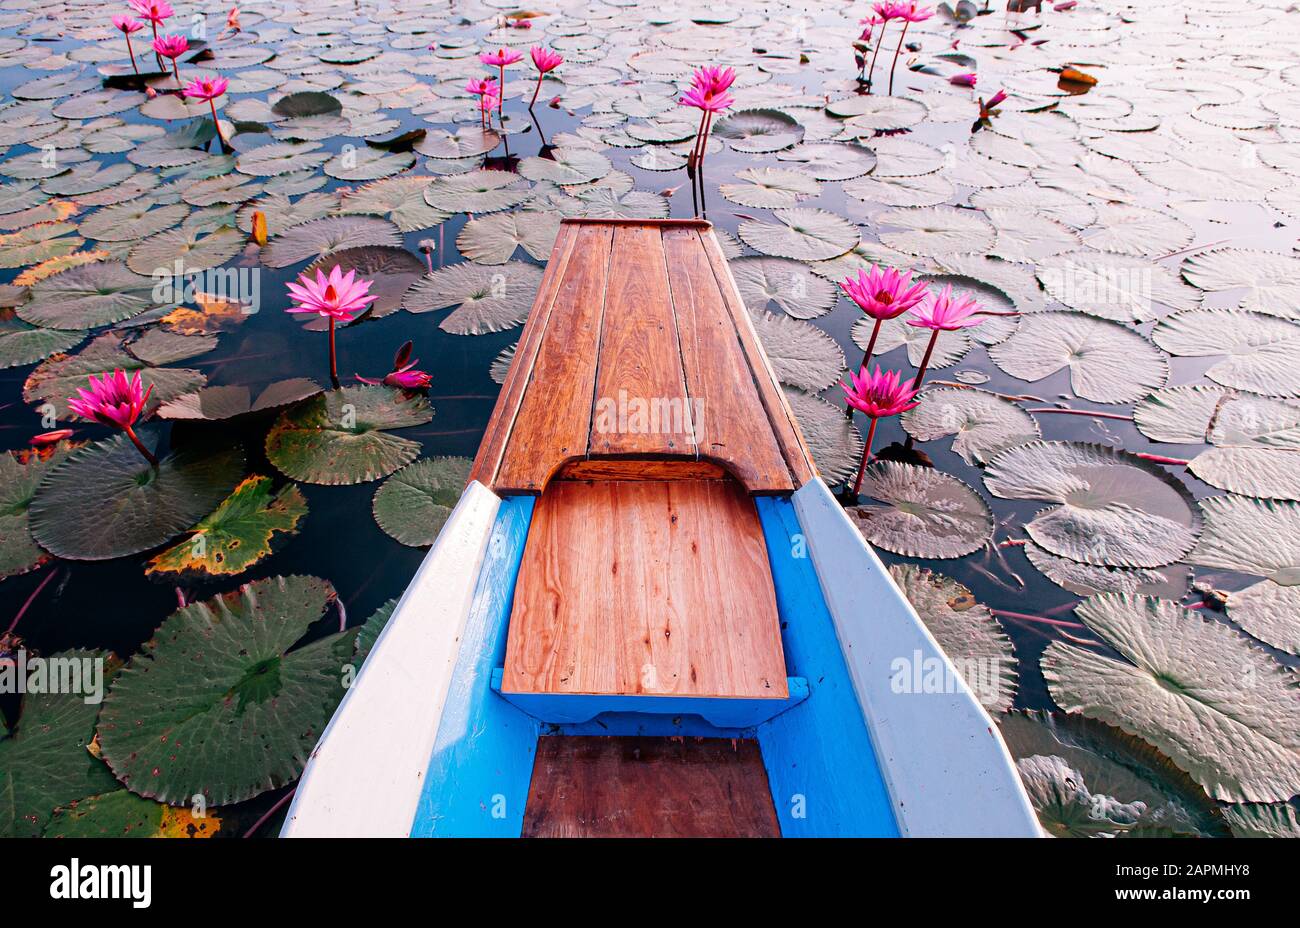 Thai long tail boat bow travel in peaceful Nong Harn full bloom red lotus lake, Udonthani - Thailand. Wooden boat in red water lilies lotus sea. Stock Photo